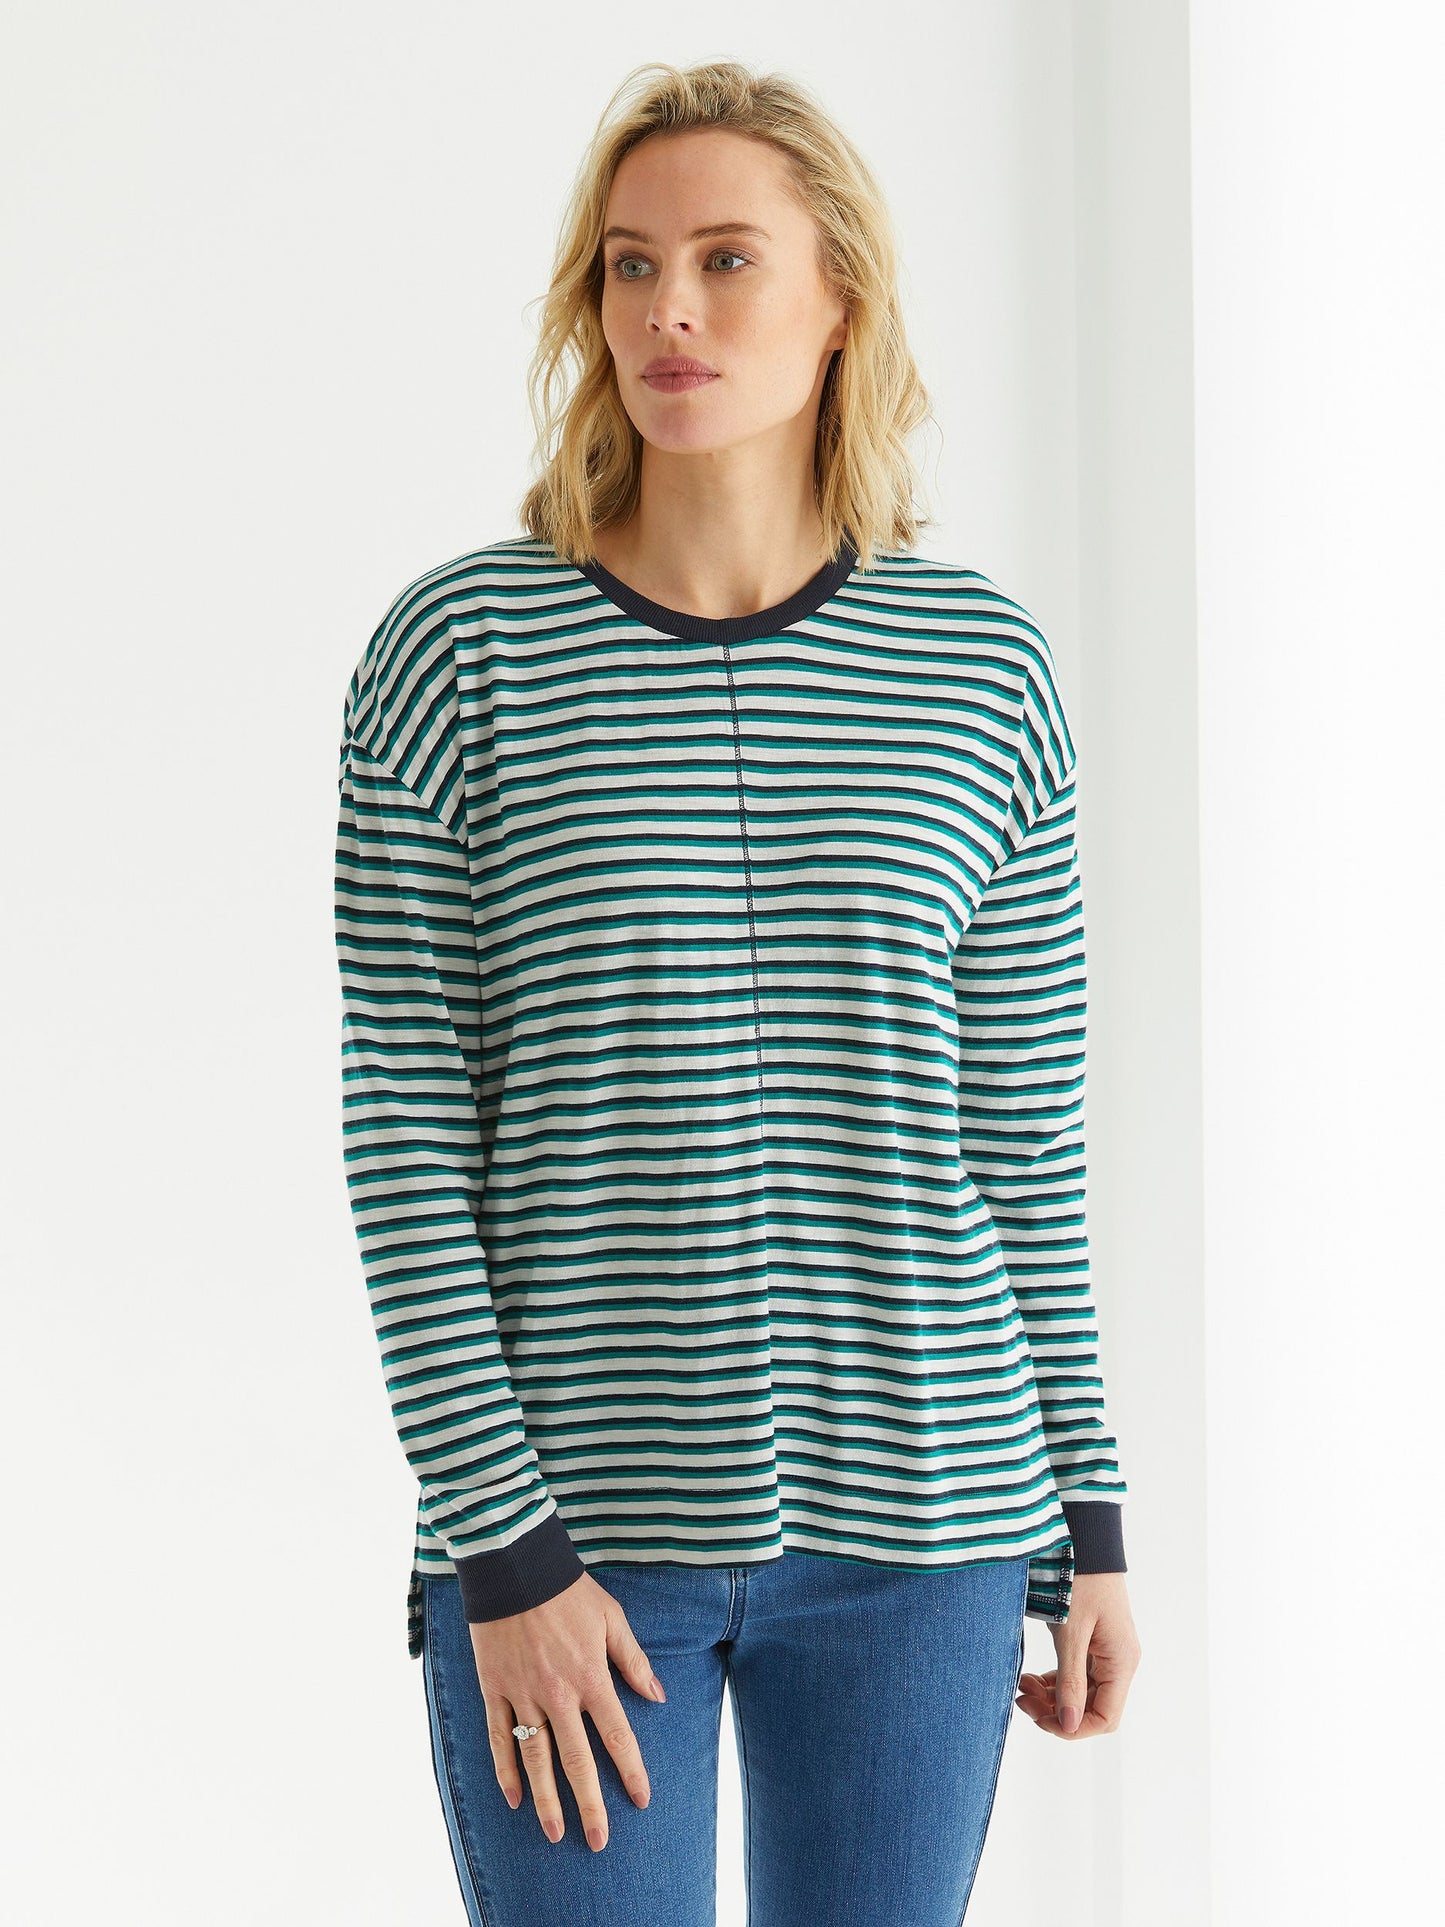 Marco Polo L/S RELAXED | EMERALD MP7320